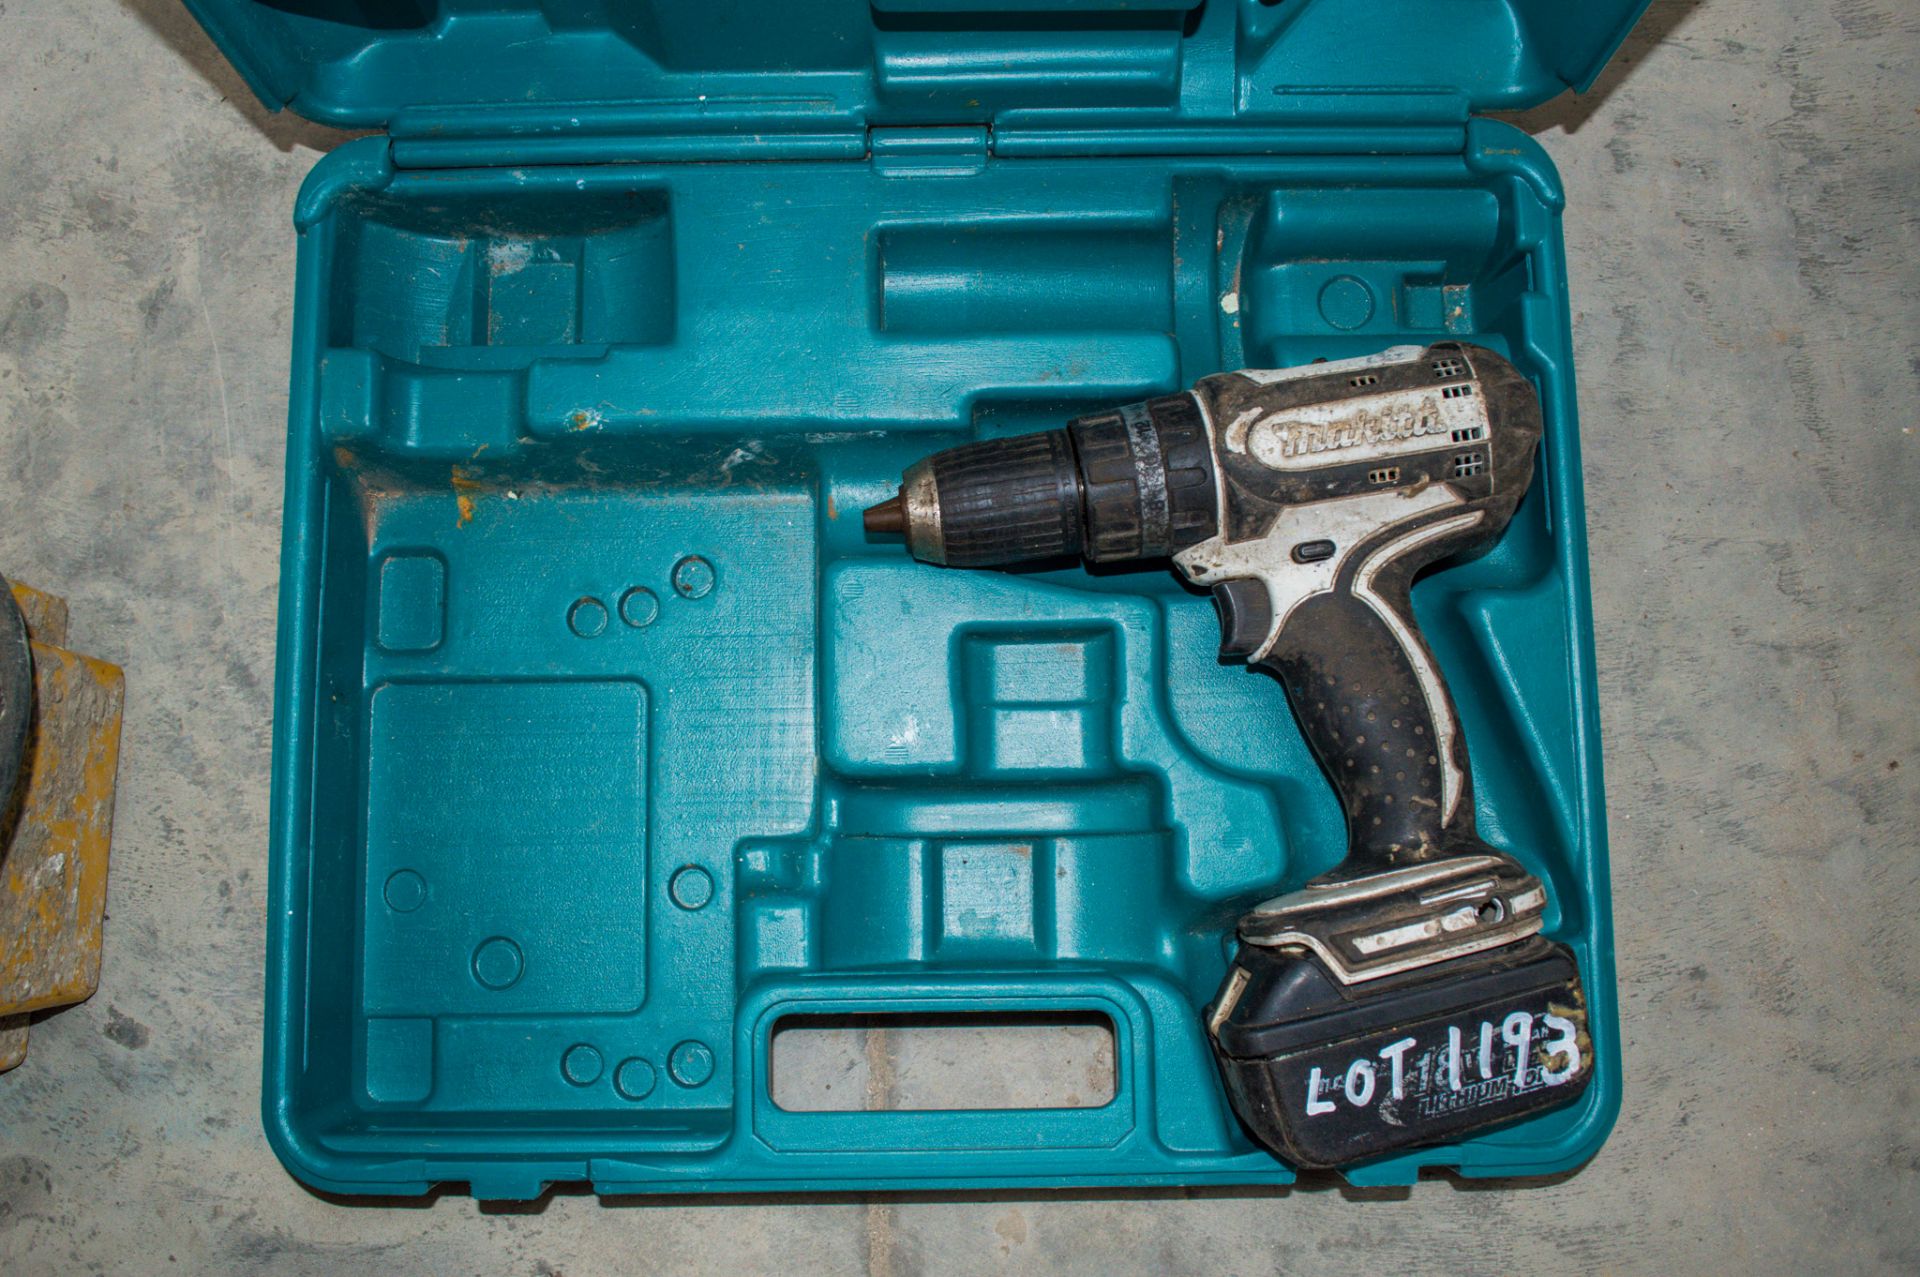 Makita 18v cordless drill c/w battery and carry case ** No charger ** ** No VAT on hammer price